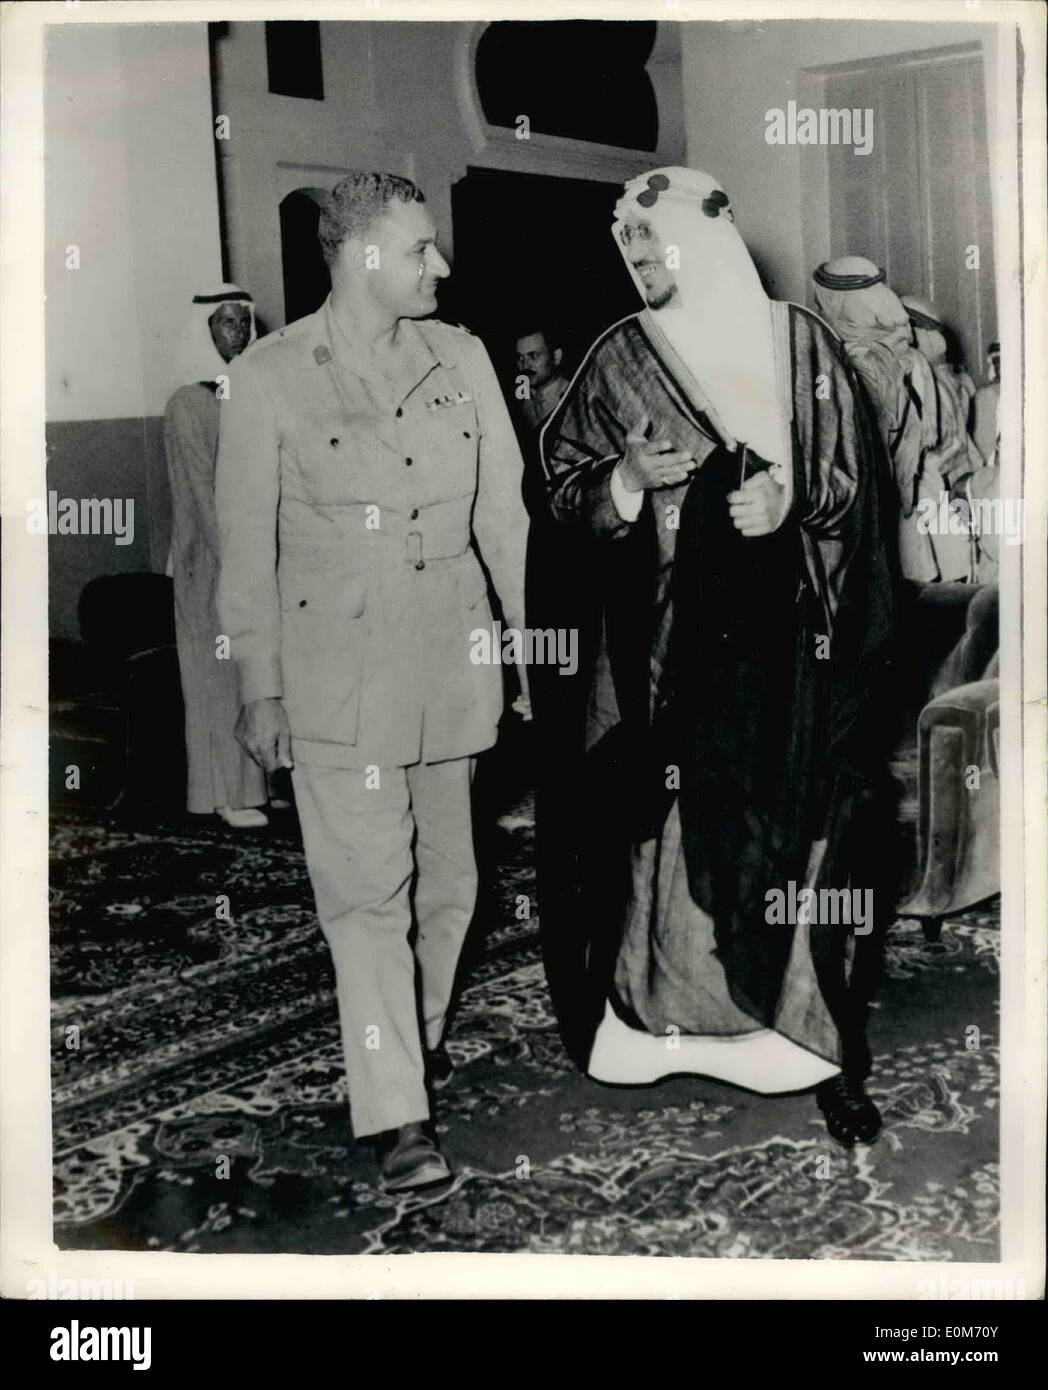 Nov. 11, 1953 - Egypt Offers Condolences to the New King of Saudi Arabia: Lieut. Col. Gamal Abdul Nasser Egypt's Deputy Prime Minister headed a mission to Saudi Arabia recently to offer condolences to King Saud IBN Abudl Aziz the new King of Saudi Arbia on the death of his father King Ibn Saud. The paid a visit to Mecca. Photo shows Lieut. Col. Gamal Abdul Nasser with H.M. King IBN Saud - when he conveyed Egypt's condolence. Stock Photo